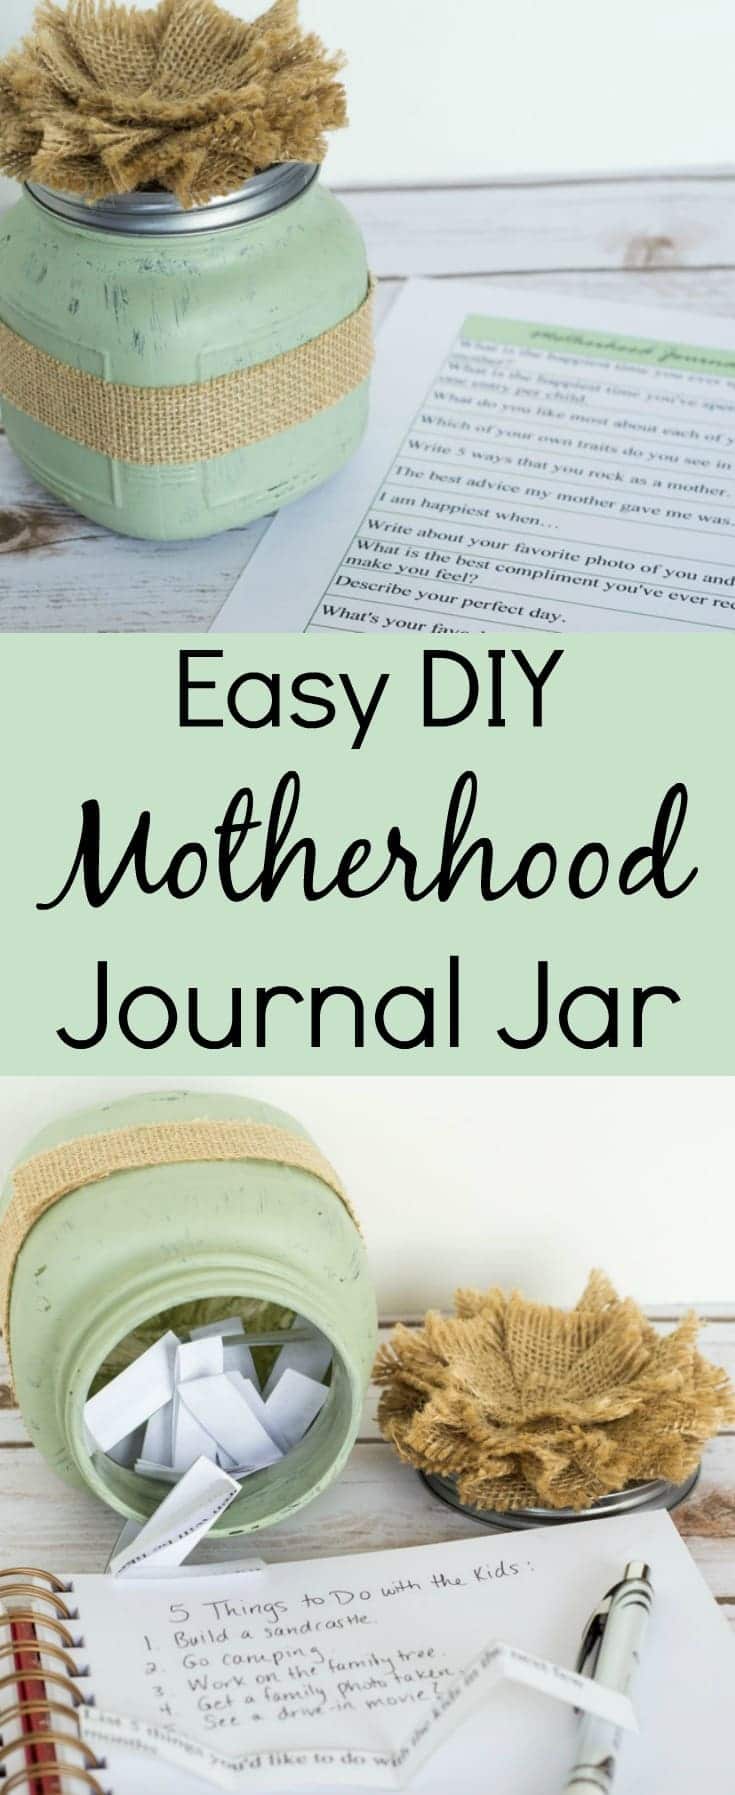 This motherhood journal jar is such an easy DIY gift for Mother's Day! The printable prompts provide lots of inspiration for mom's journaling which then becomes a treasured gift for her children. #motherhood #mothersday #mothersdaygift #diy via @wondermomwannab